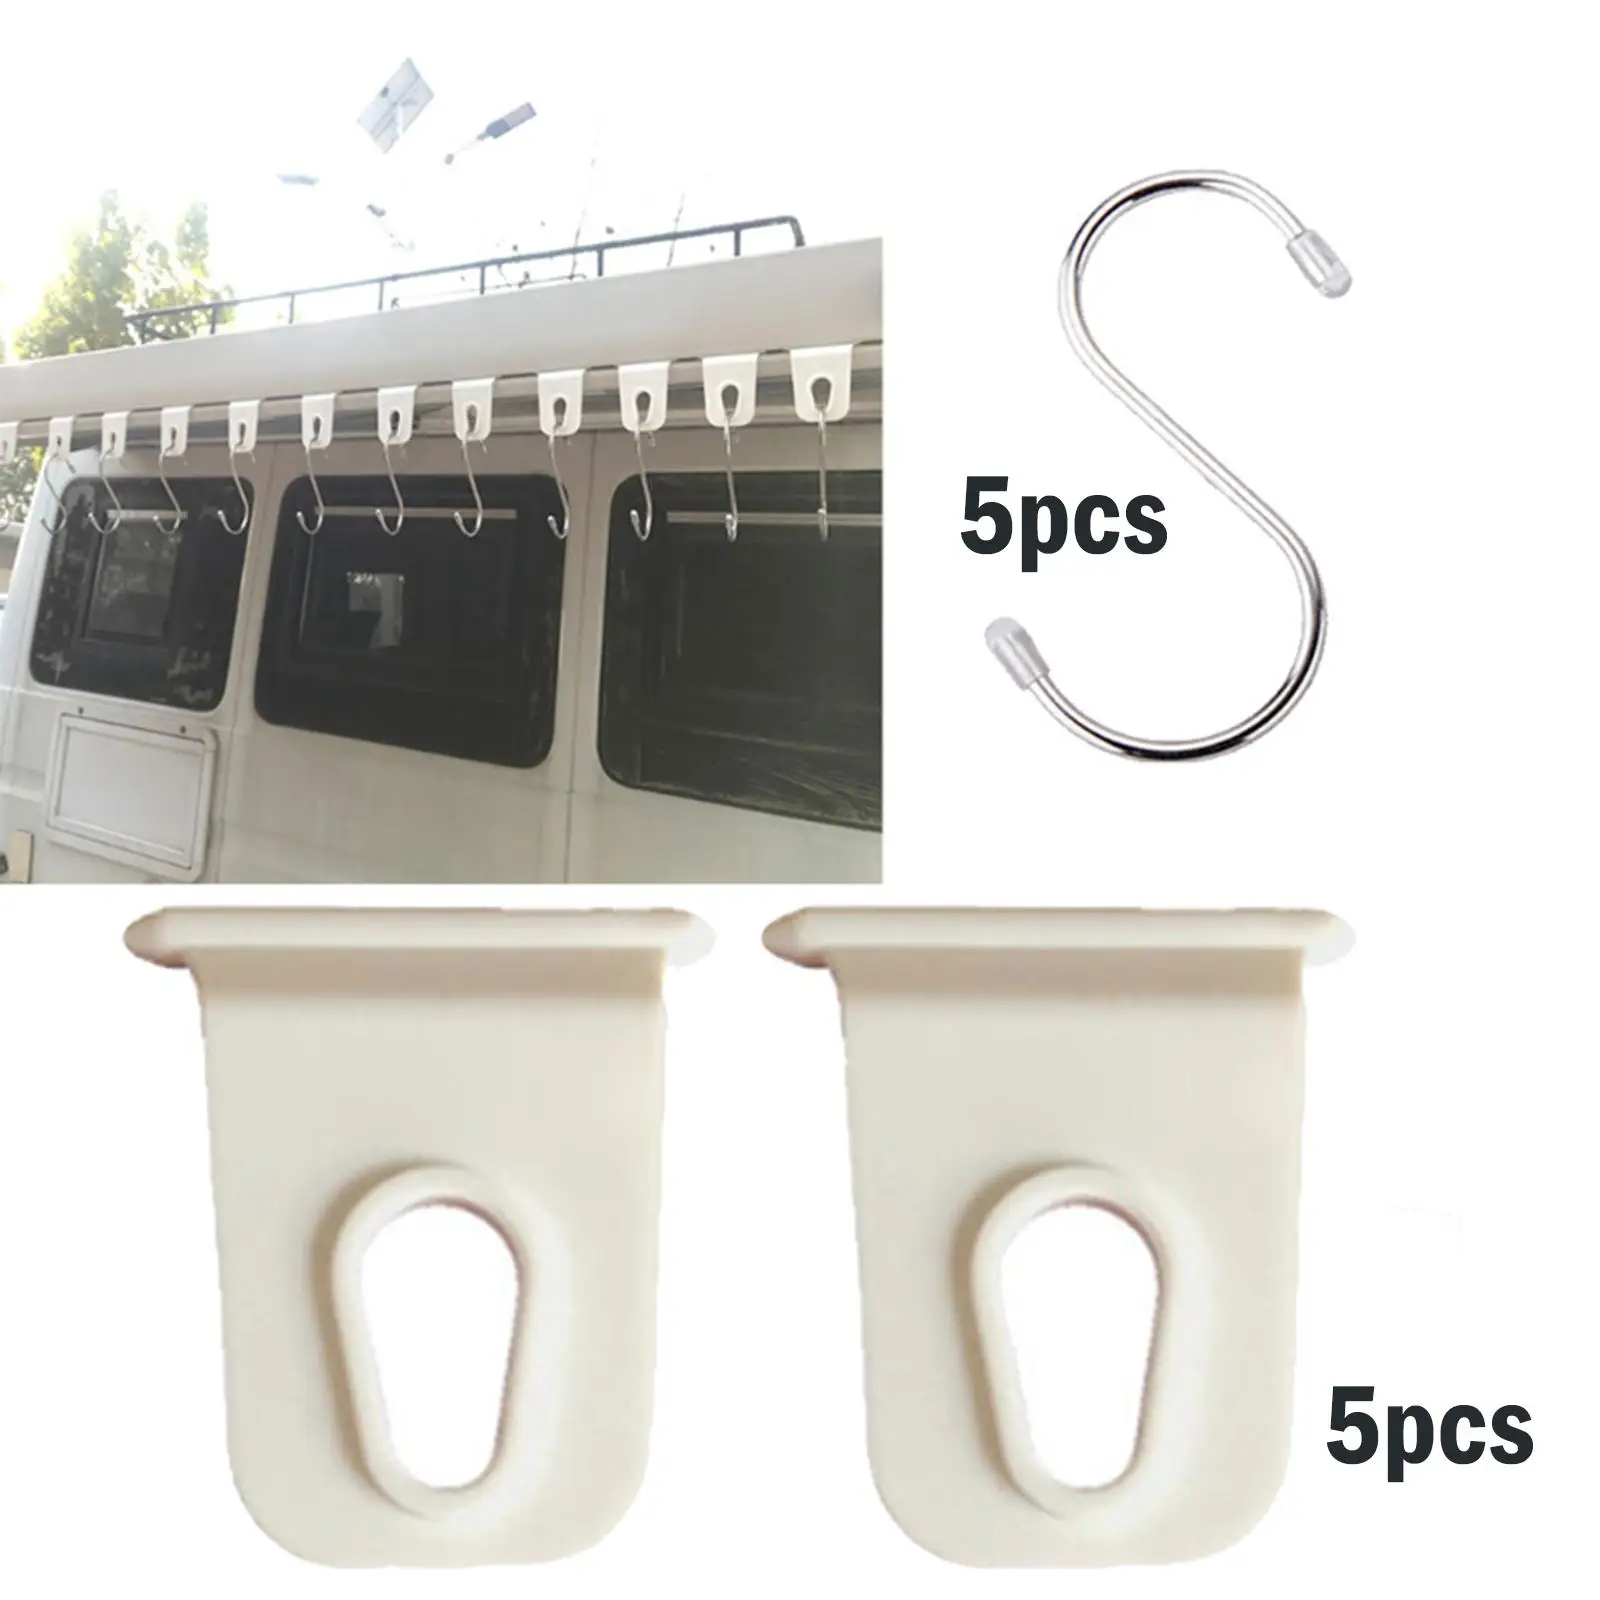 RV Awning Hook Multifunctional Outdoor Clothes Hanger StHooks